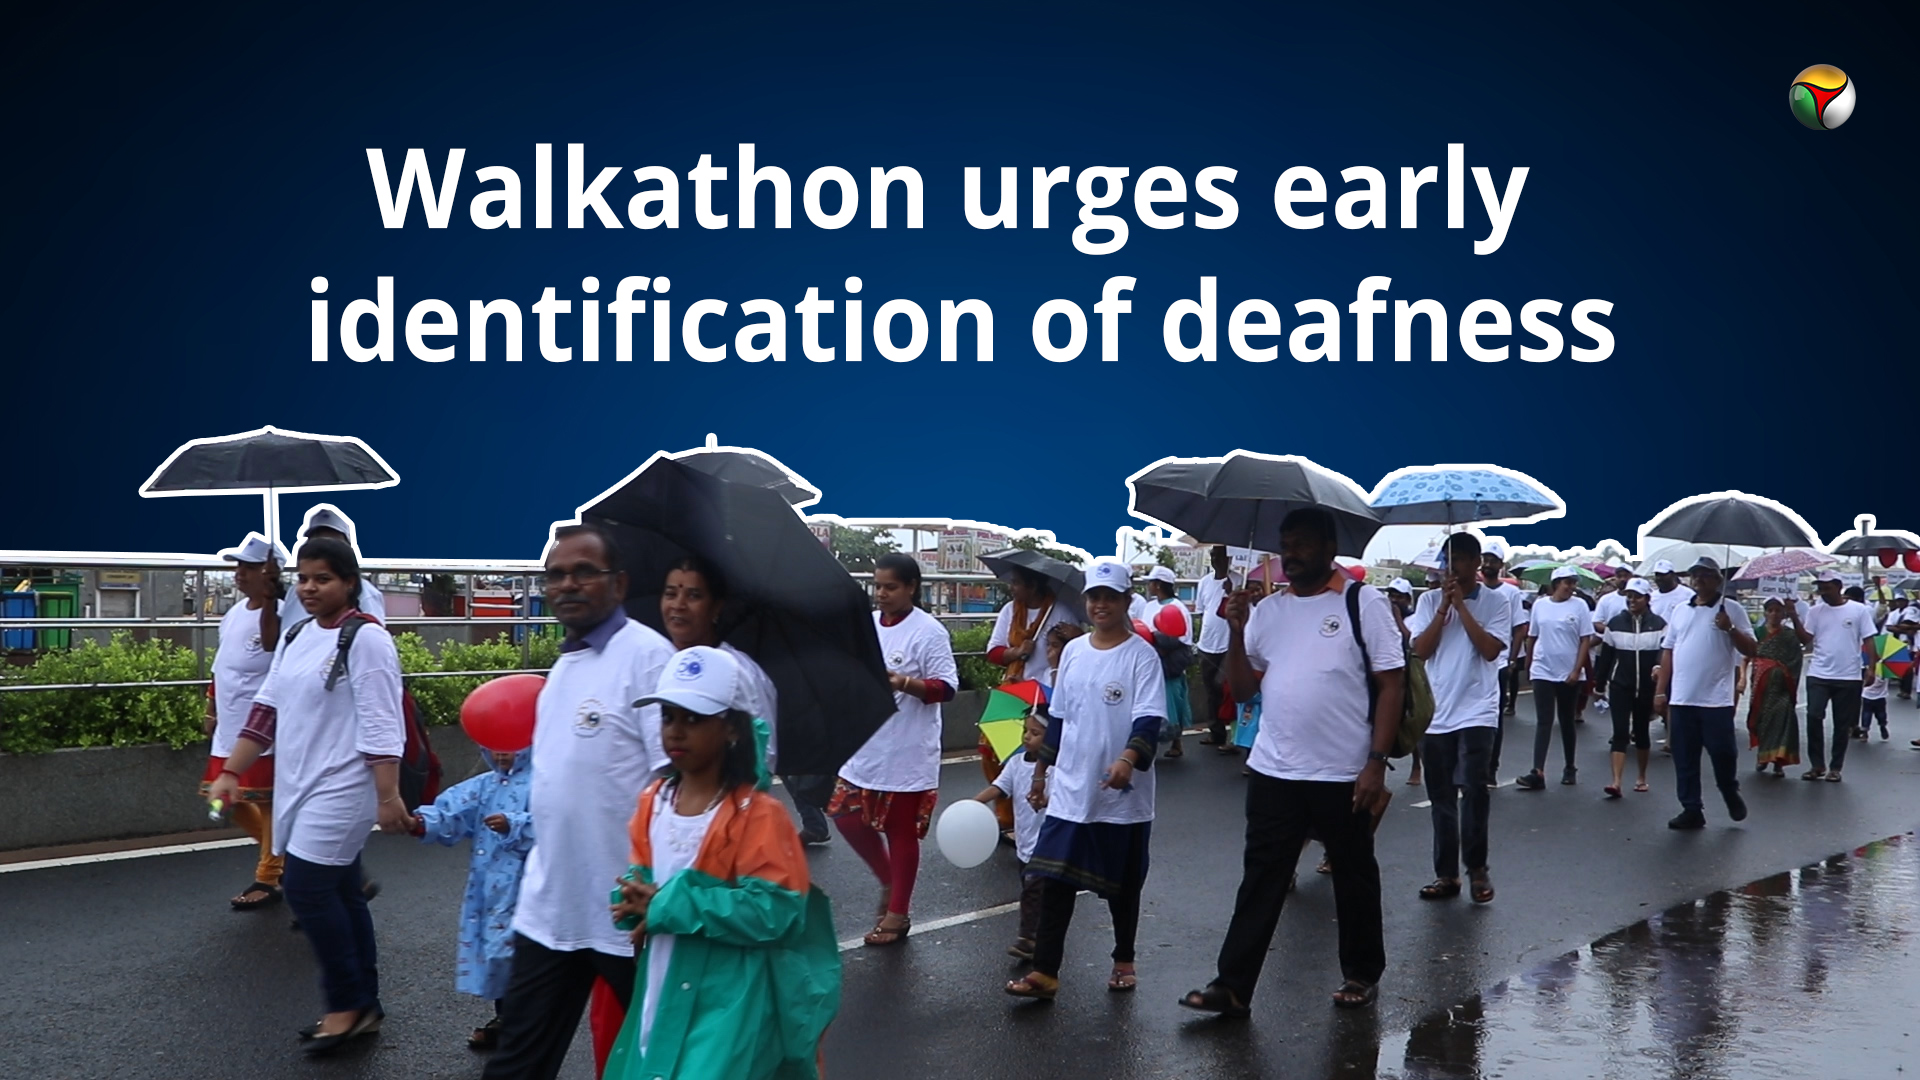 Walkathon urges early identification of deafness